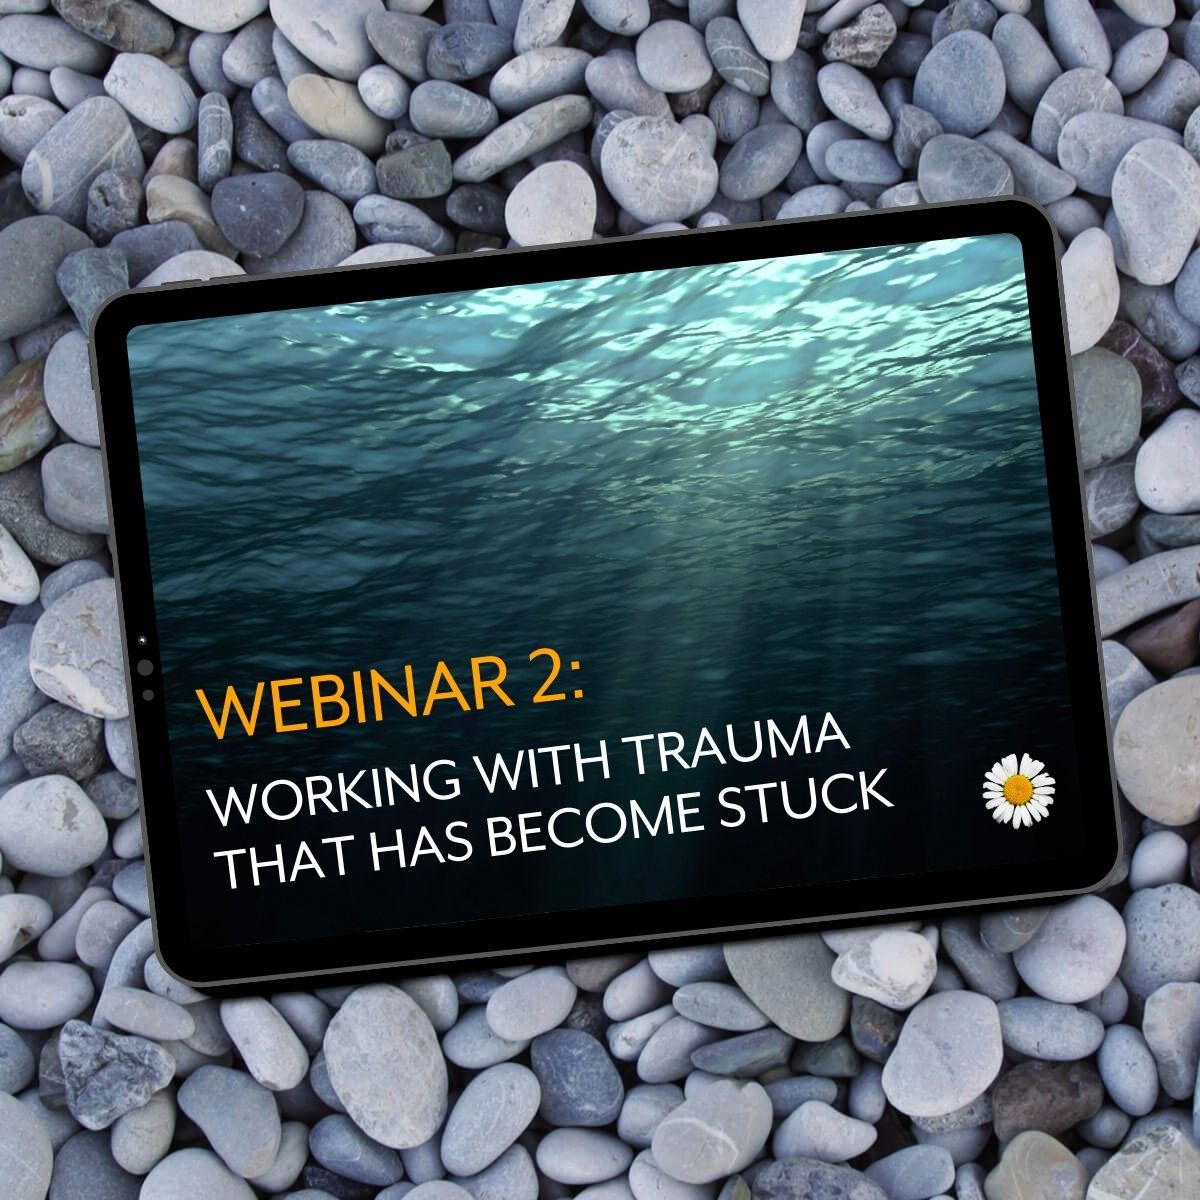 Webinar 2: Working with trauma that has become stuck